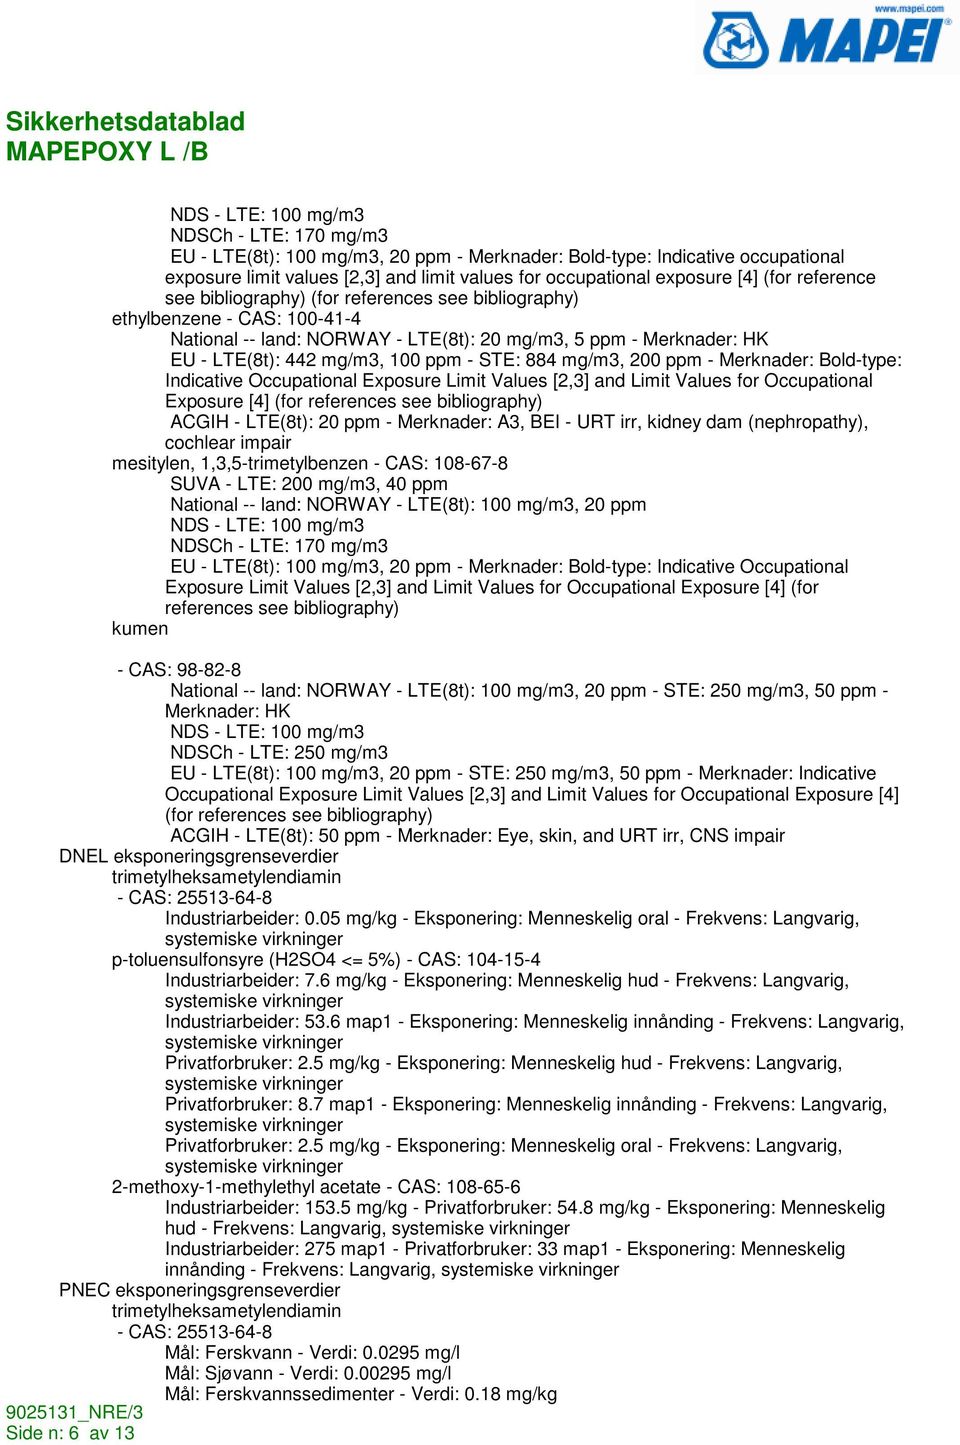 STE: 884 mg/m3, 200 ppm - Merknader: Bold-type: Indicative Occupational Exposure Limit Values [2,3] and Limit Values for Occupational Exposure [4] (for references see bibliography) ACGIH - LTE(8t):